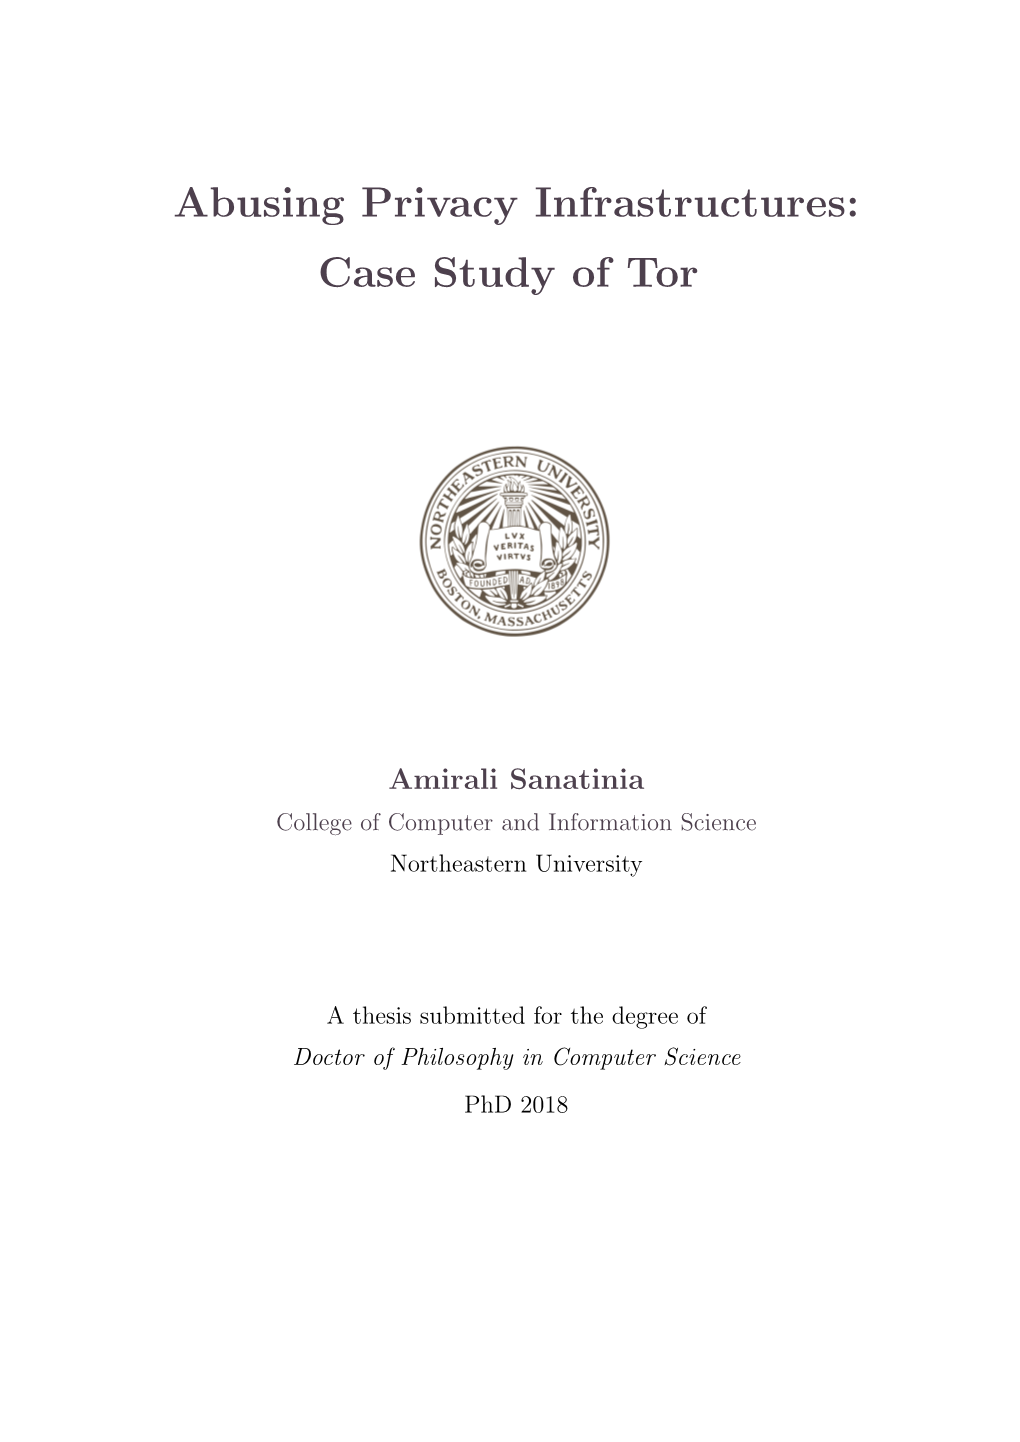 Abusing Privacy Infrastructures: Case Study of Tor